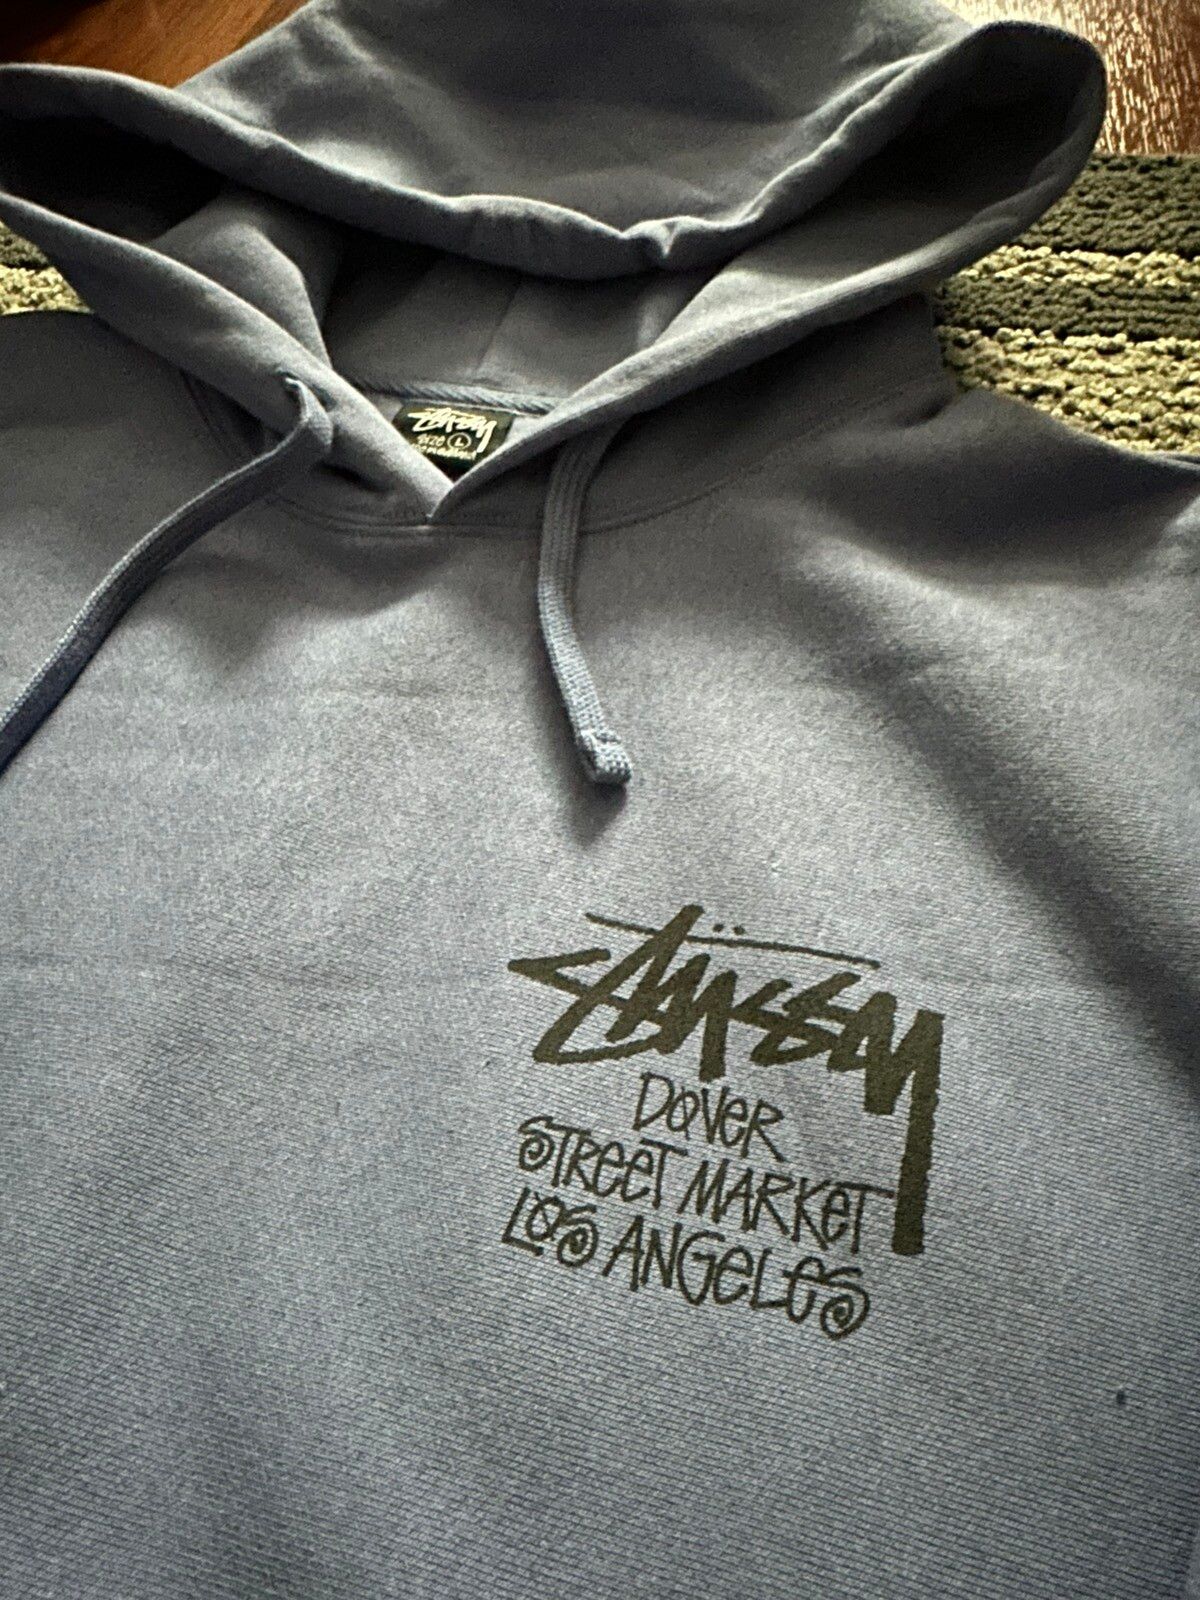 Stussy Blue Stussy Dover Street Market Los Angeles Hoodie Size US L / EU 52-54 / 3 - 2 Preview